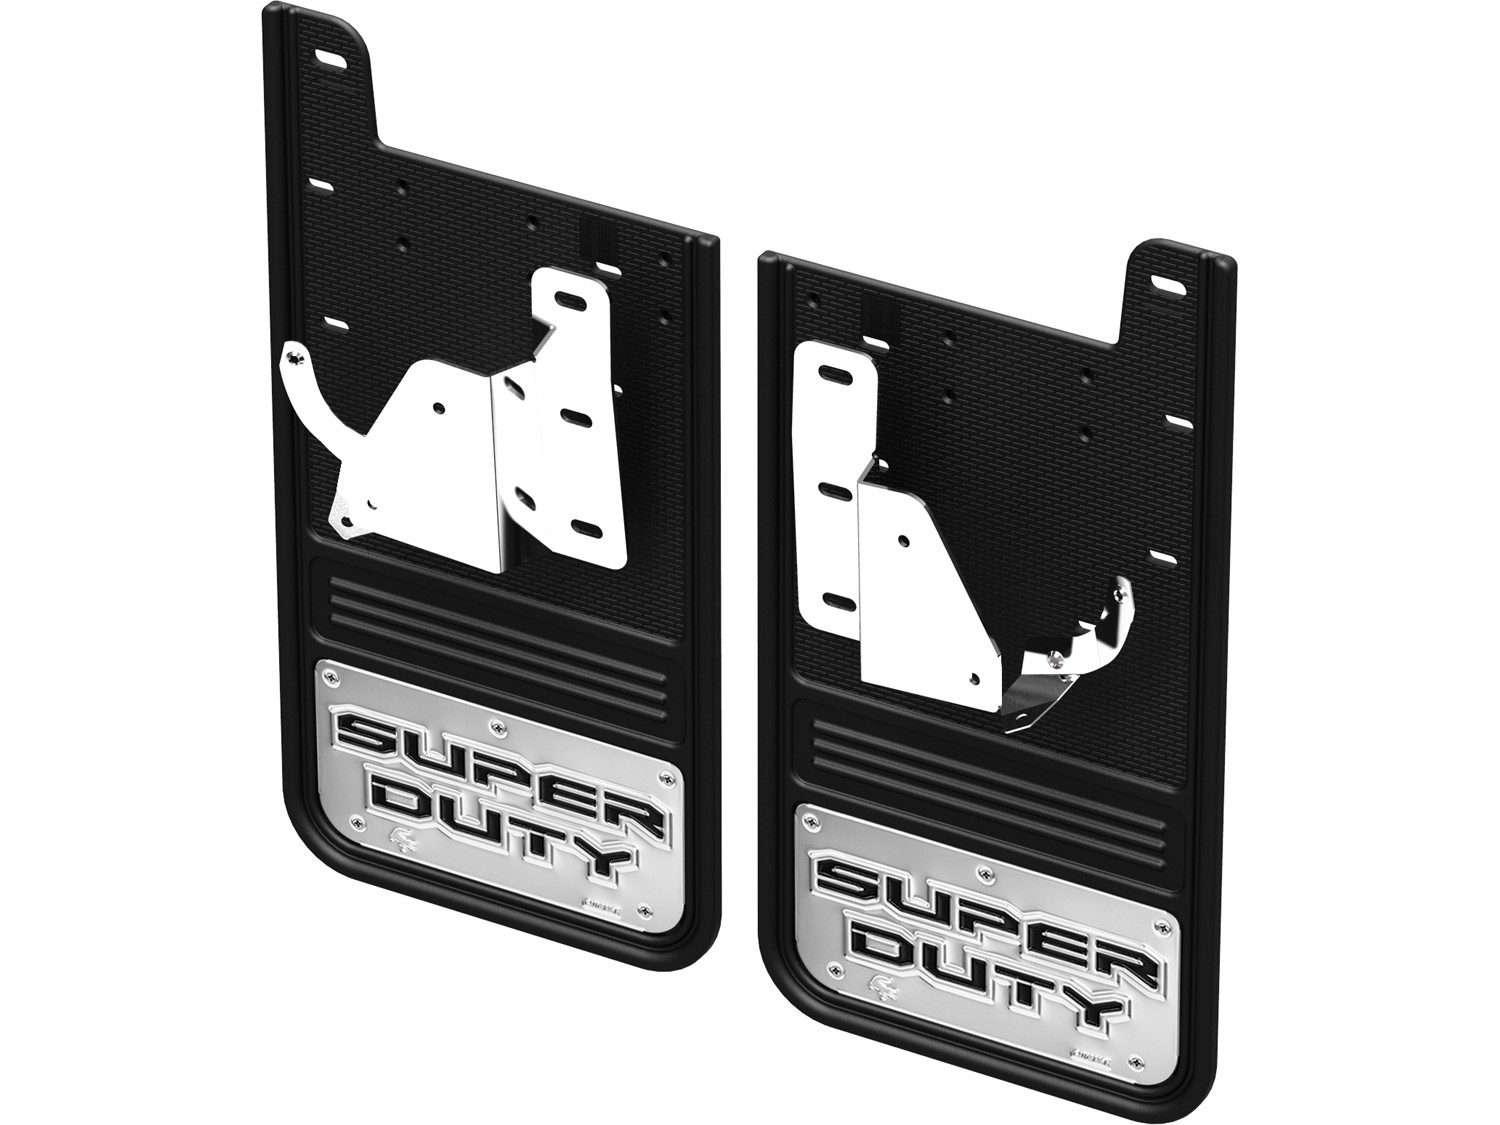 Image for Splash Guards - Gatorback by Truck Hardware, Rear Pair, Super Duty Stainless from AccessoriesCanada